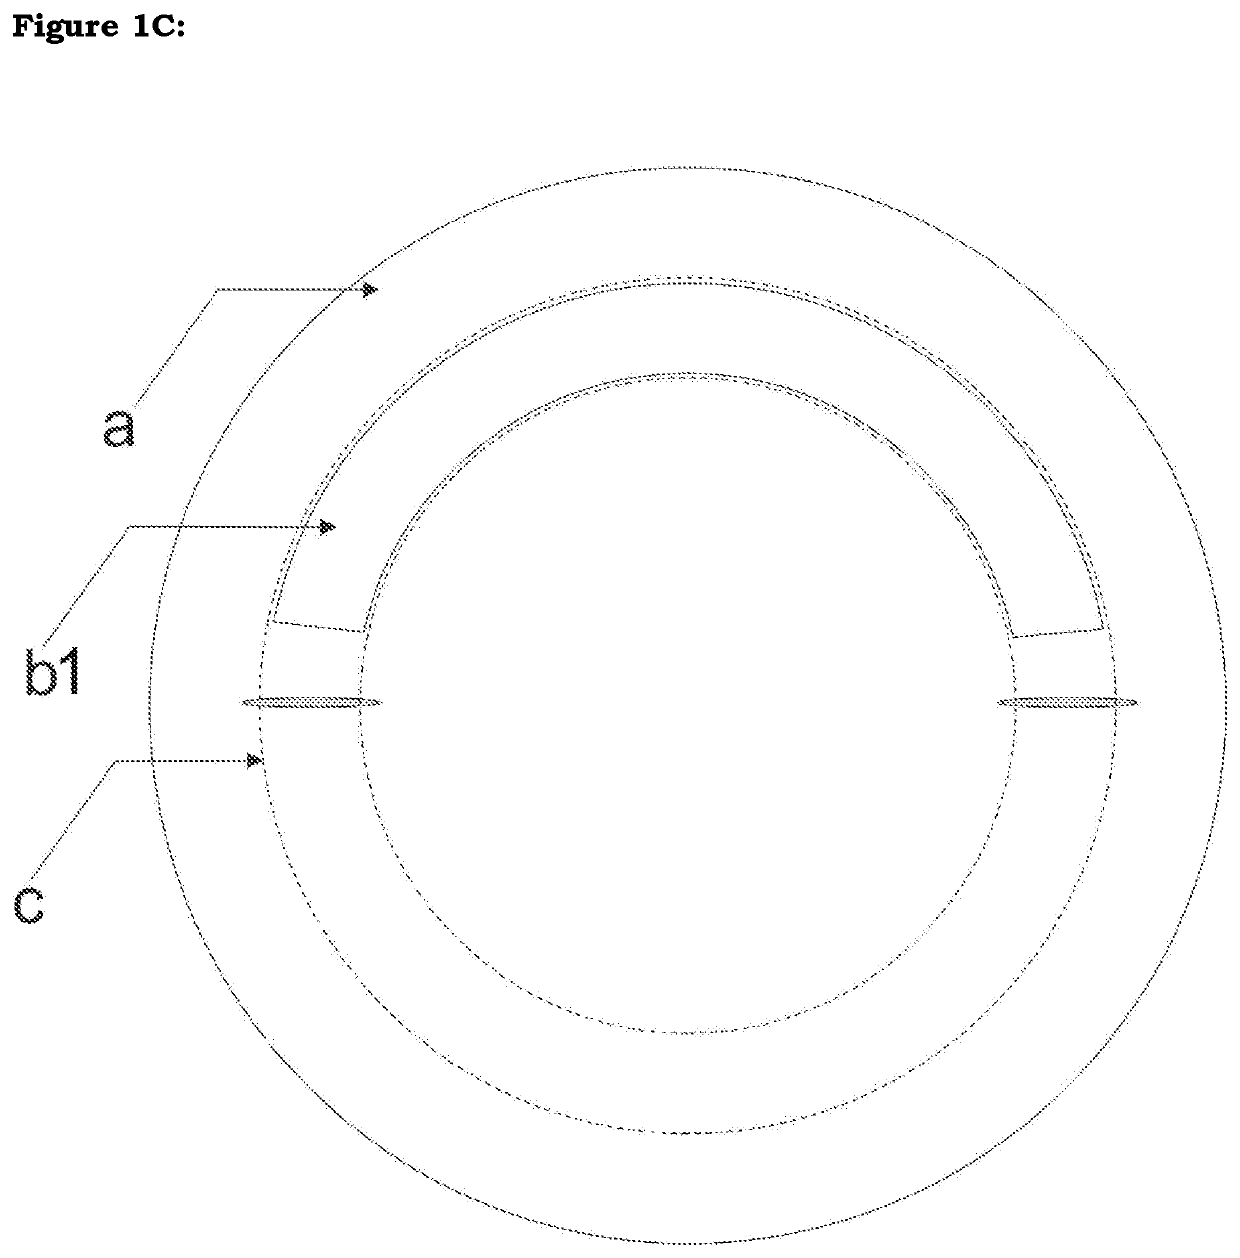 Shaped corneal segments: corneal allogenic intra-stromal devices (ring segments and rings, modified discs, modifications) for inducing shape change, regularization and stabilization of cornea in corneal ectasia and other corneal conditioins and for correction of refractive errors